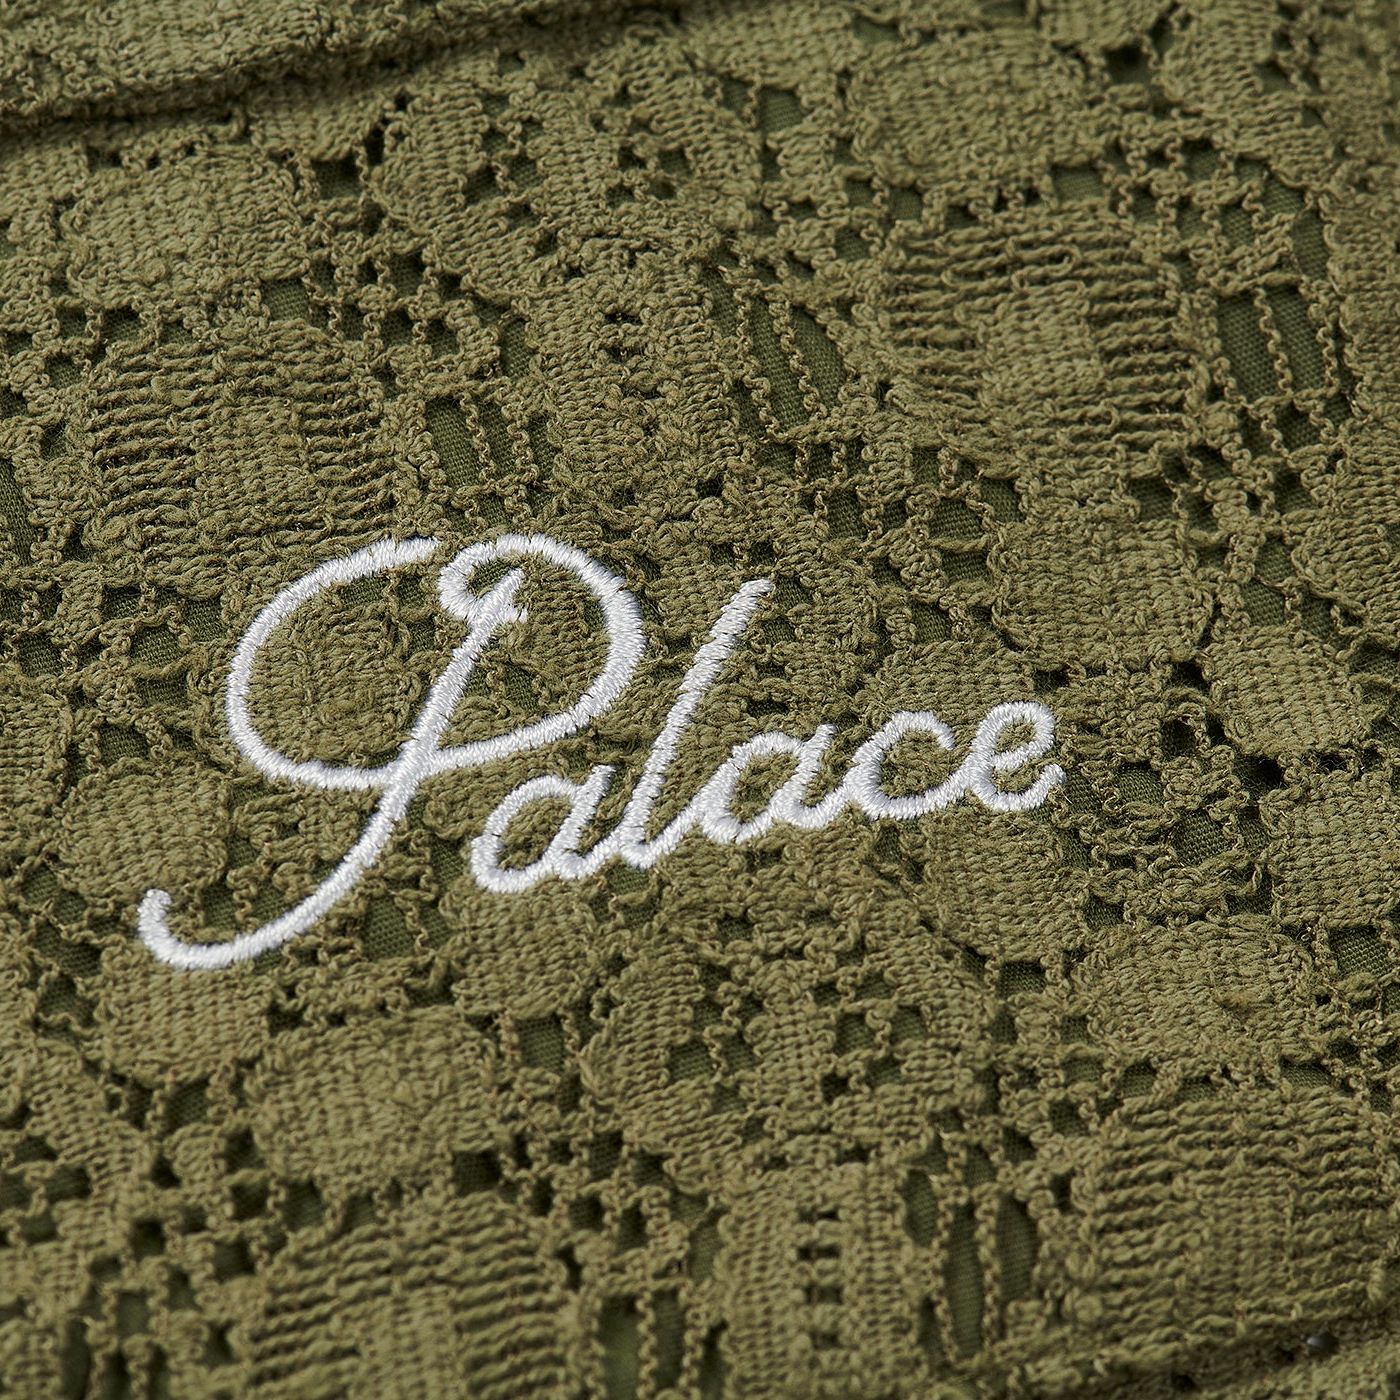 Thumbnail LACE SHIRT GREEN one color